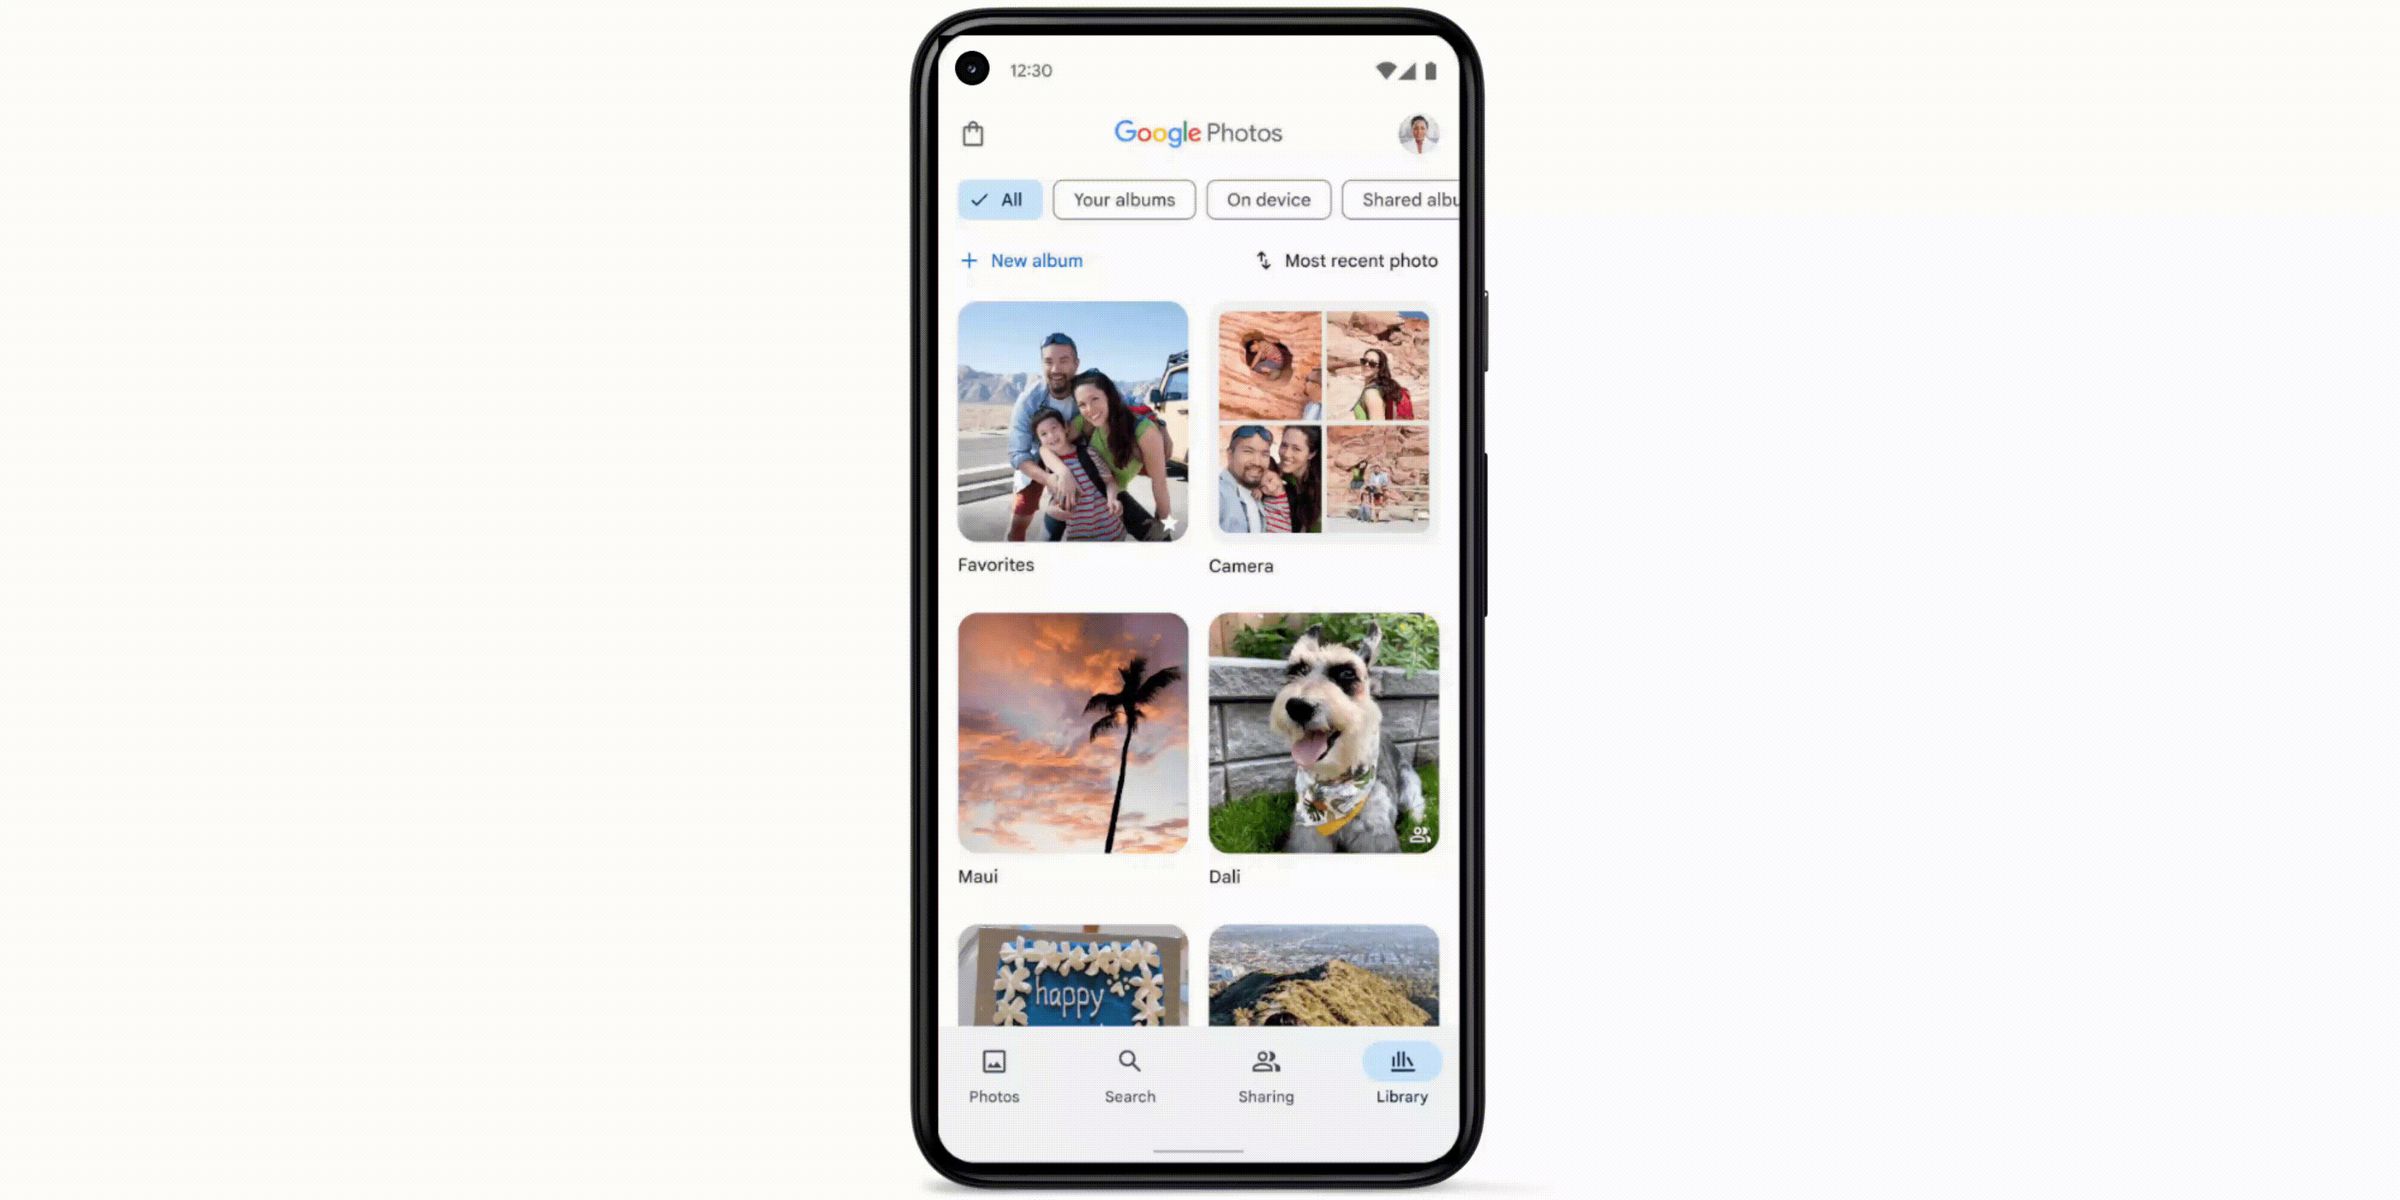 Google is introducing grid and list view layouts for its library tab.